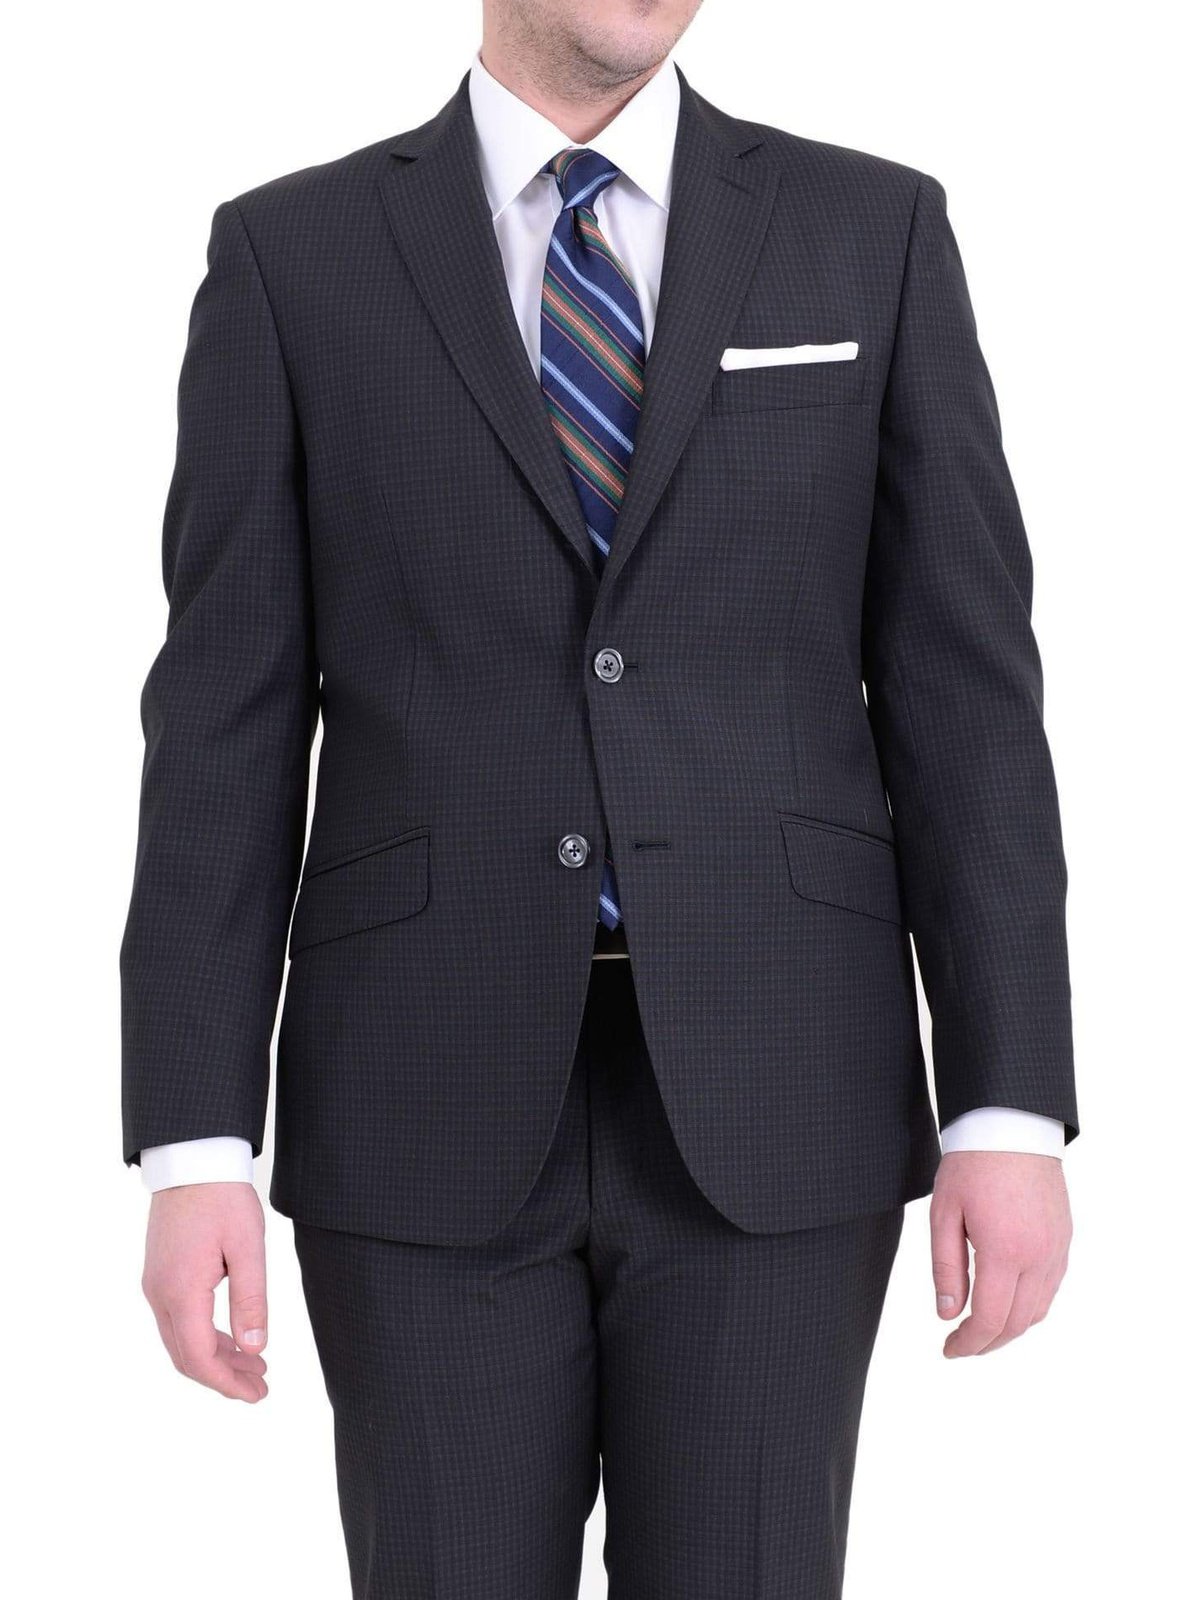 Shop Italiano Gray 100% Wool Suit | The Suit Depot